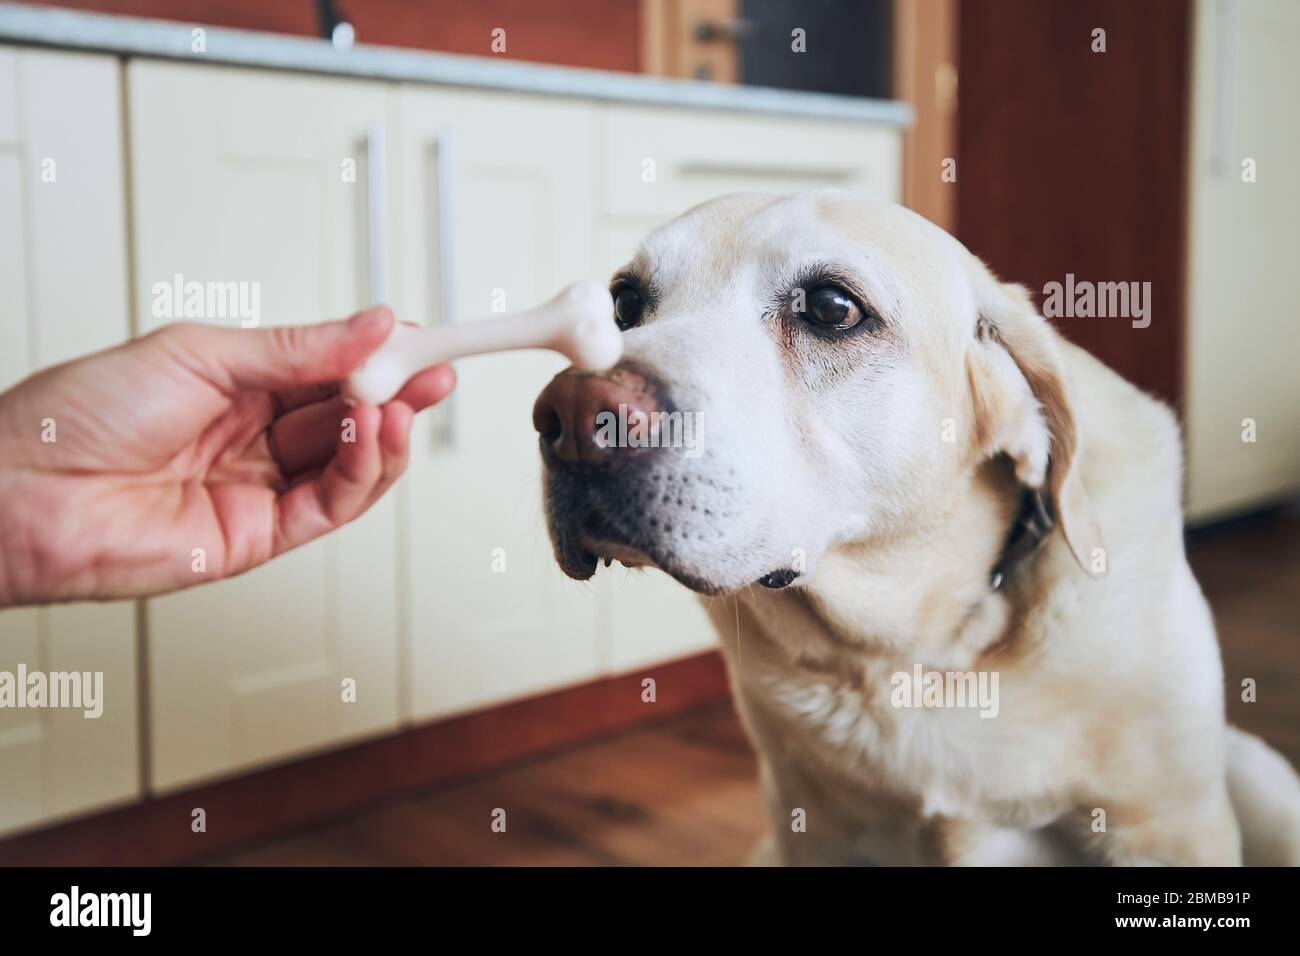 Dog concentrates on the bone. Pet owner feeding his labrador retriever in home kitchen. Stock Photo